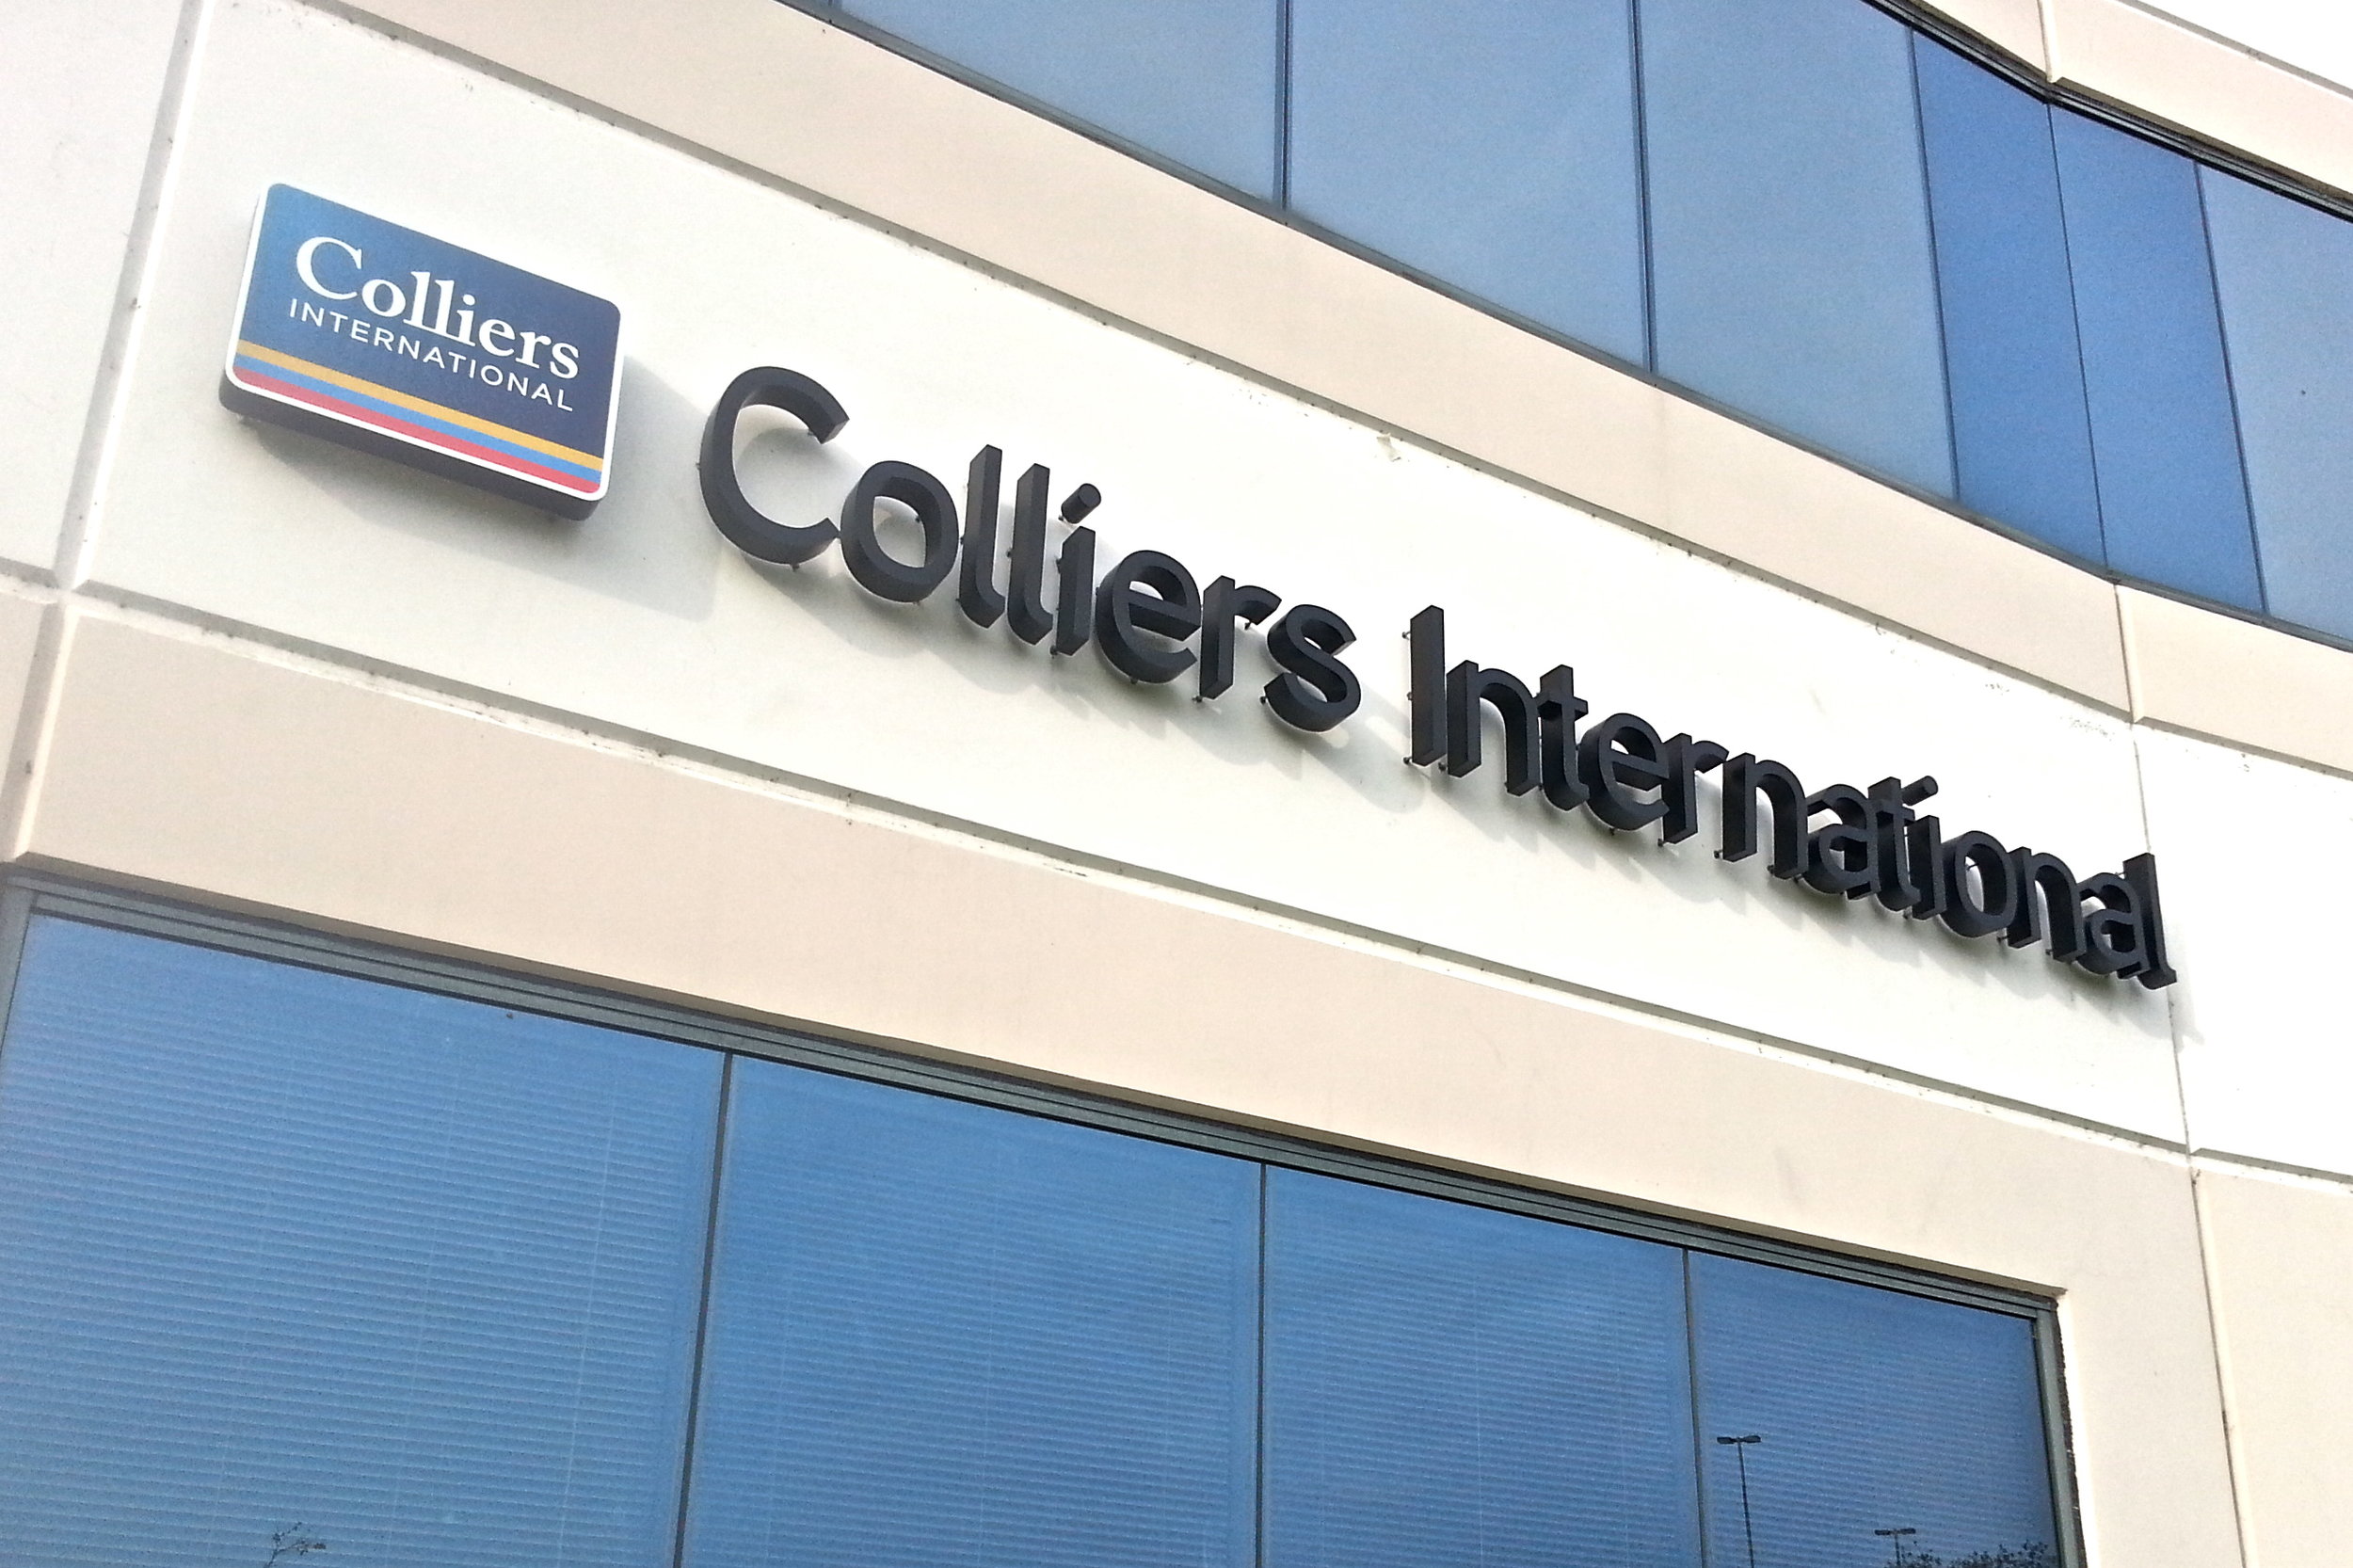 Colliers International dimensional letters and logo